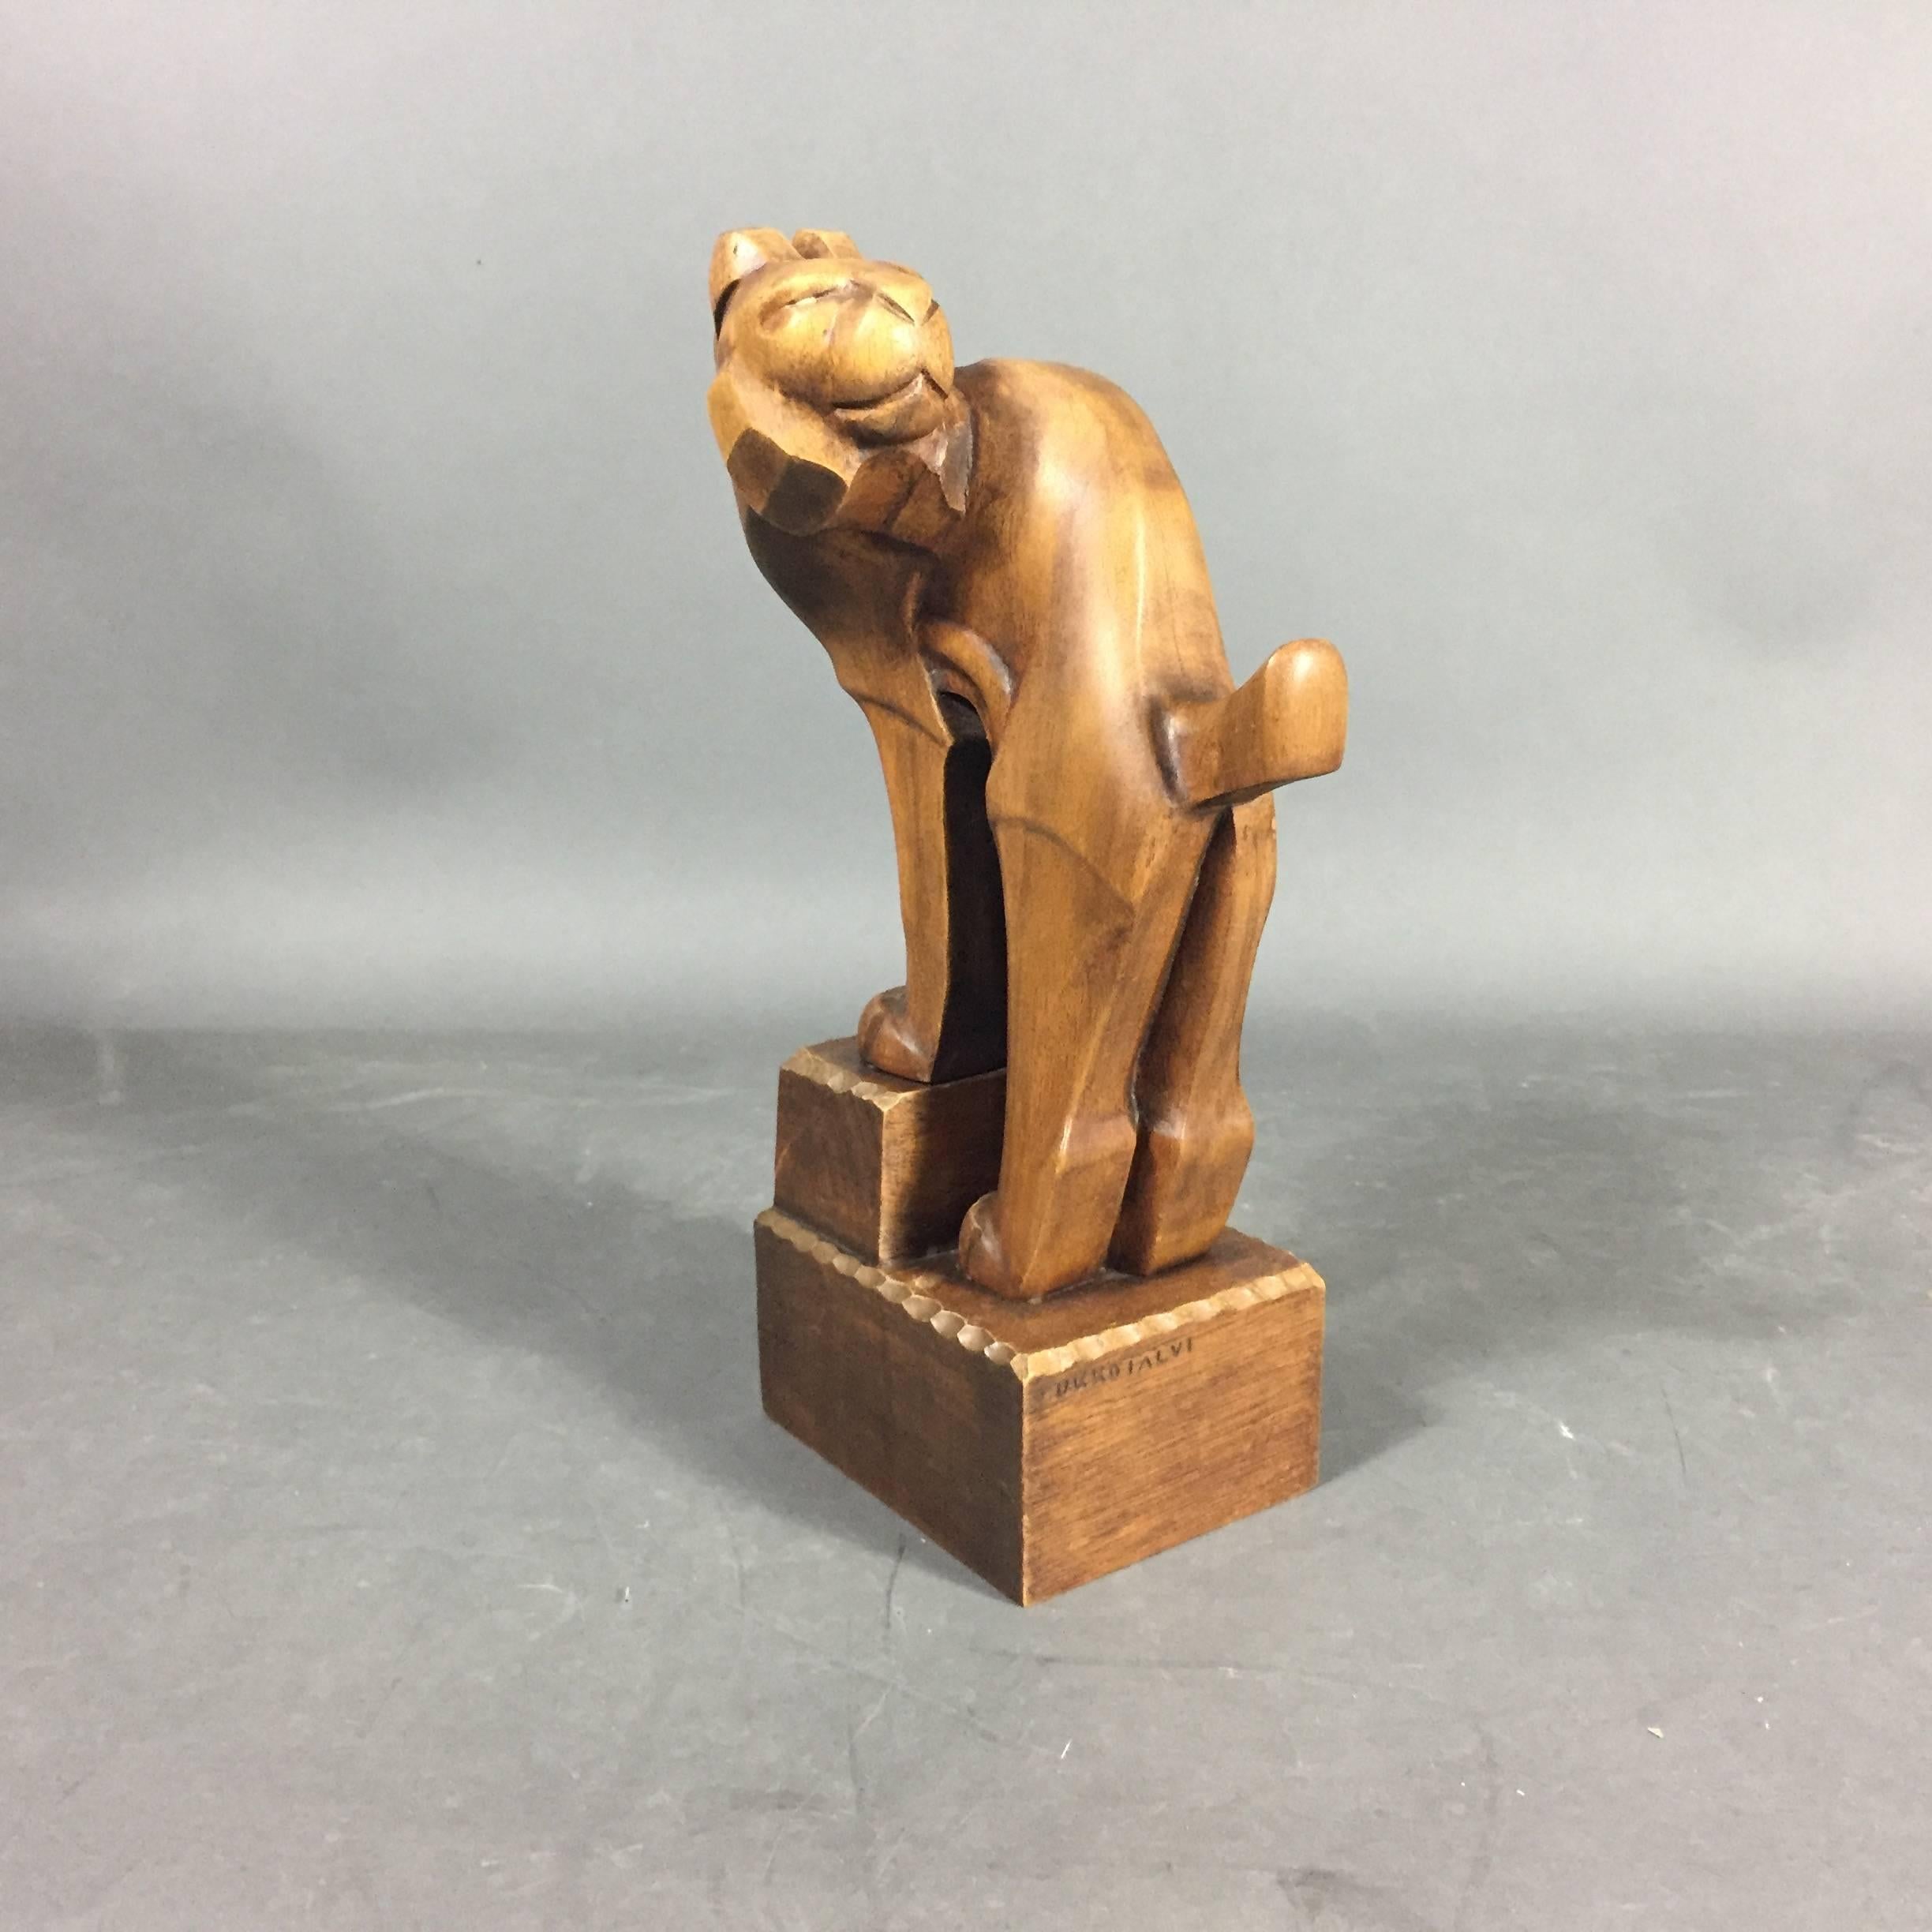 Graceful and powerful Art Deo period carved wood sculpture of a stylized lion by Finish artist Ukko Talvi from the 1920s. Signed.